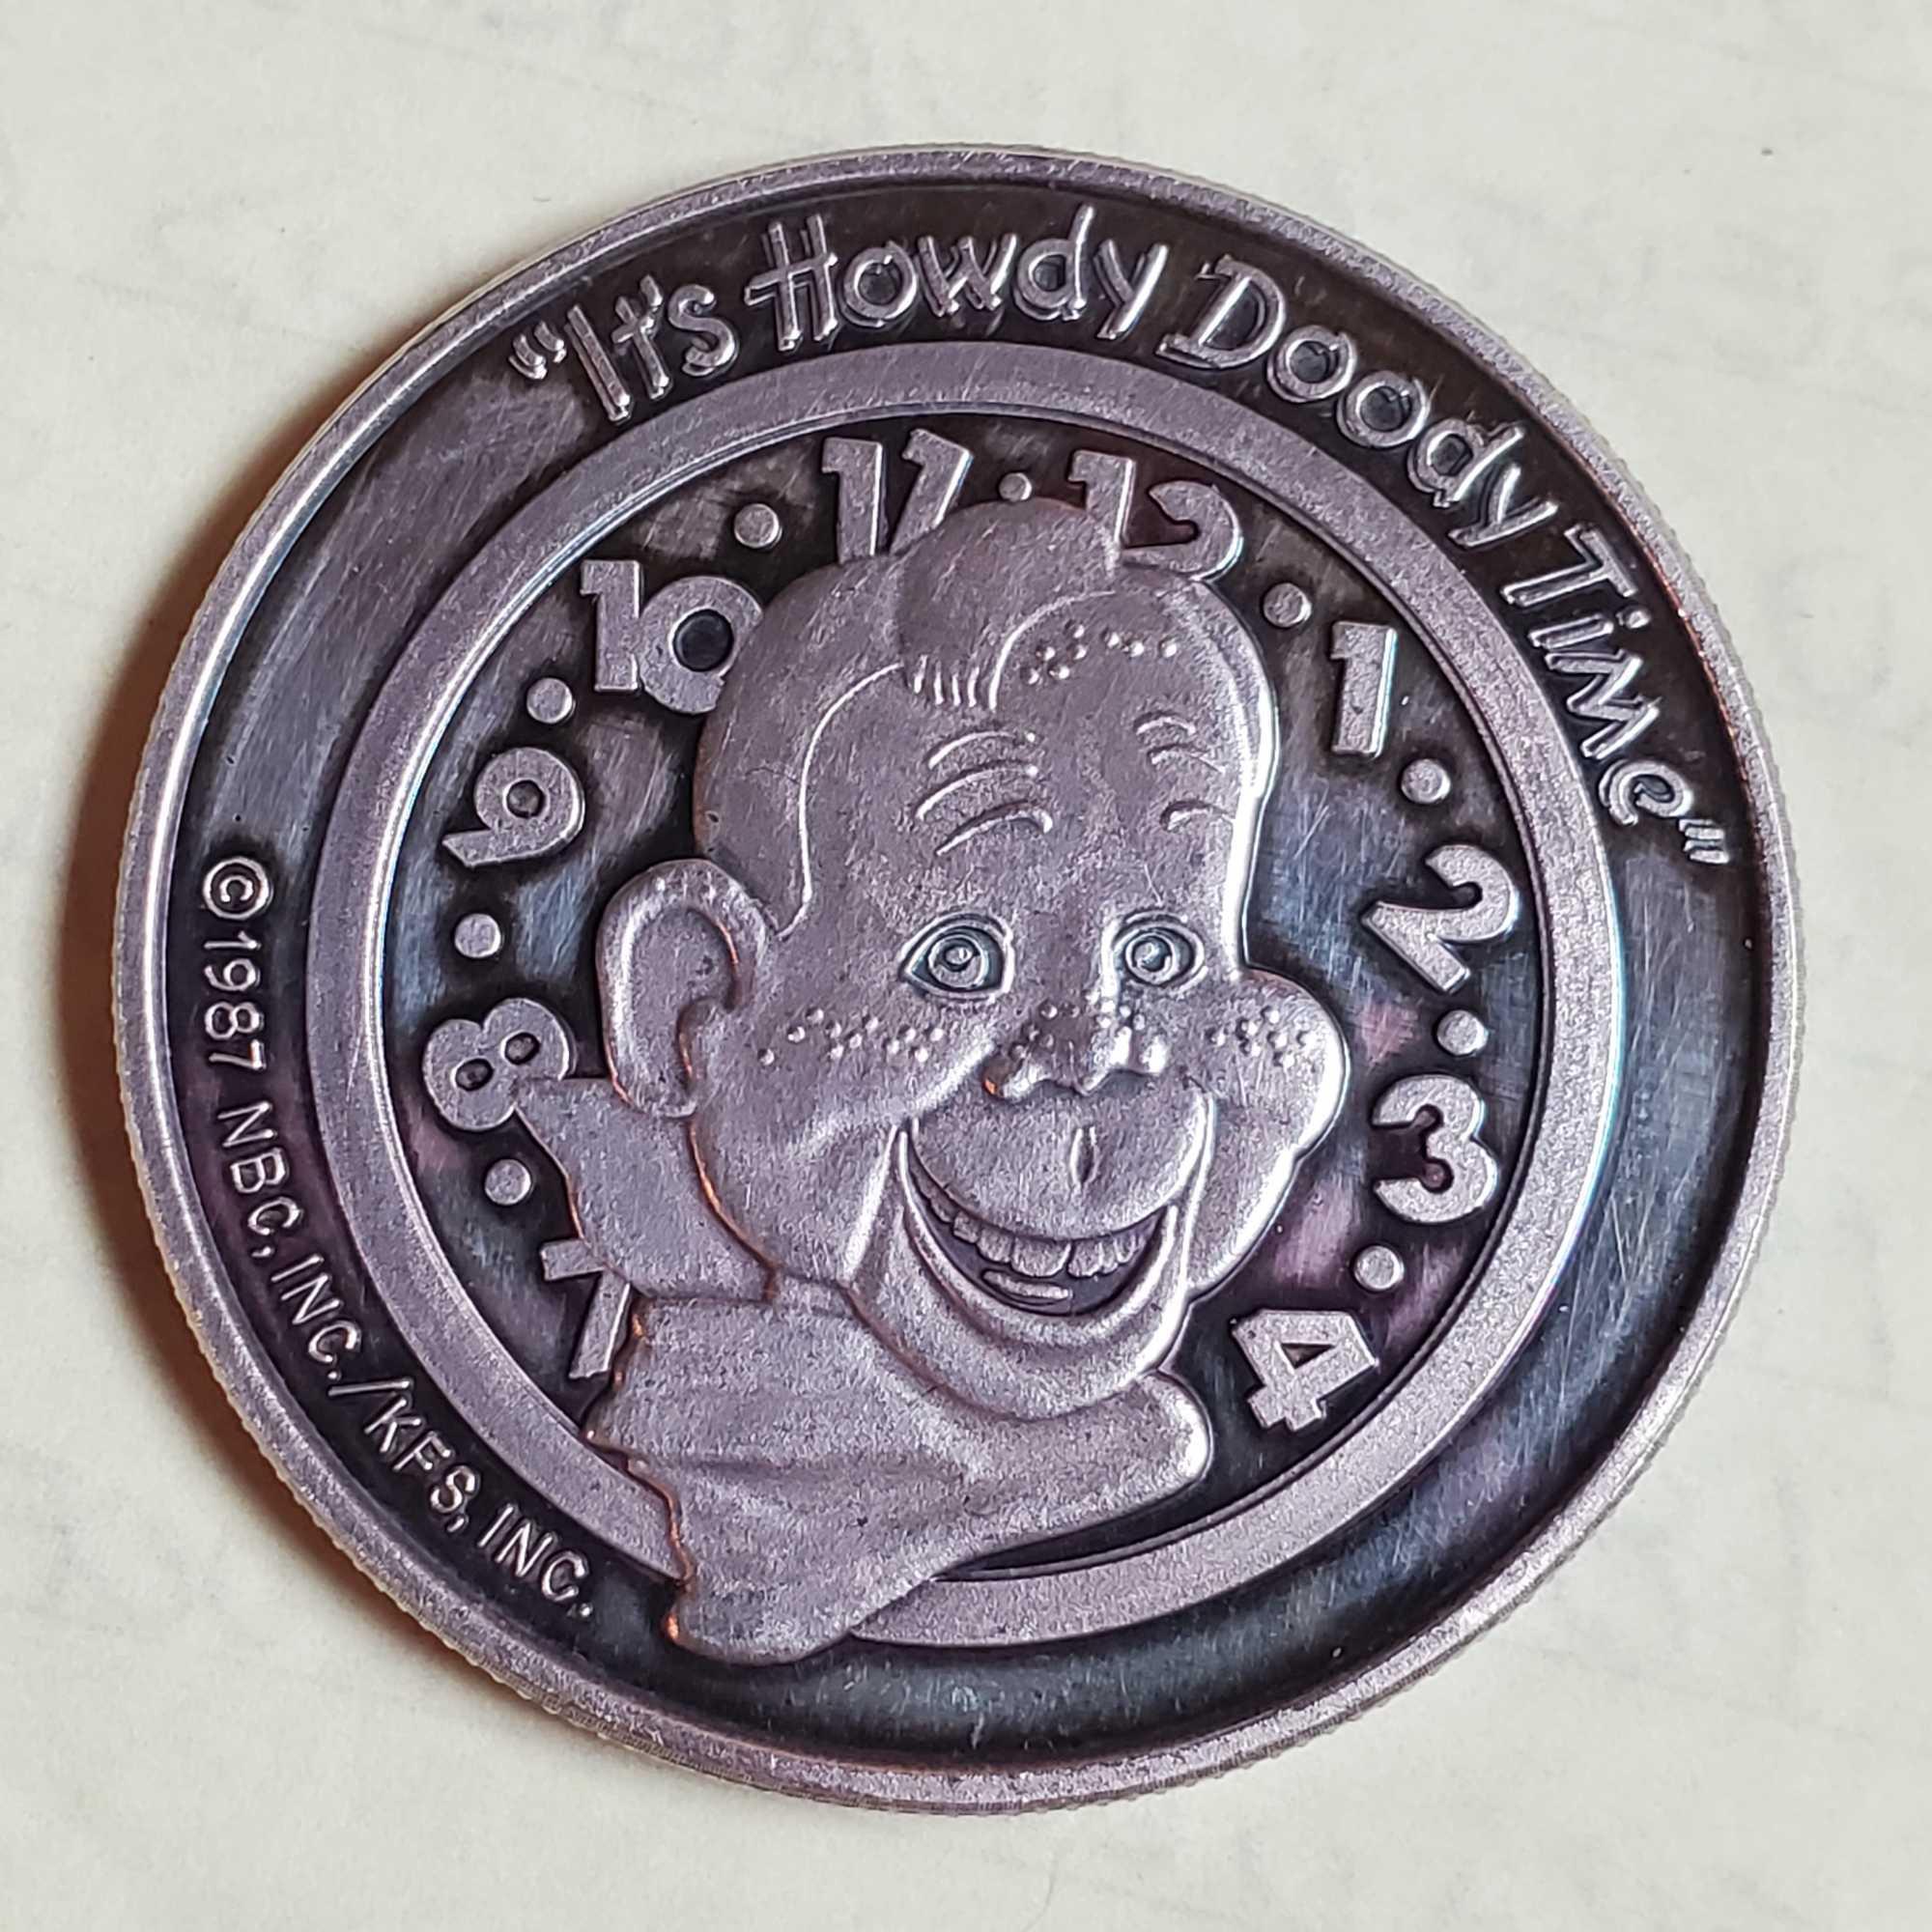 Howdy Doody Silver Coin Round and 2 JM 1 oz .999 Silver Bars